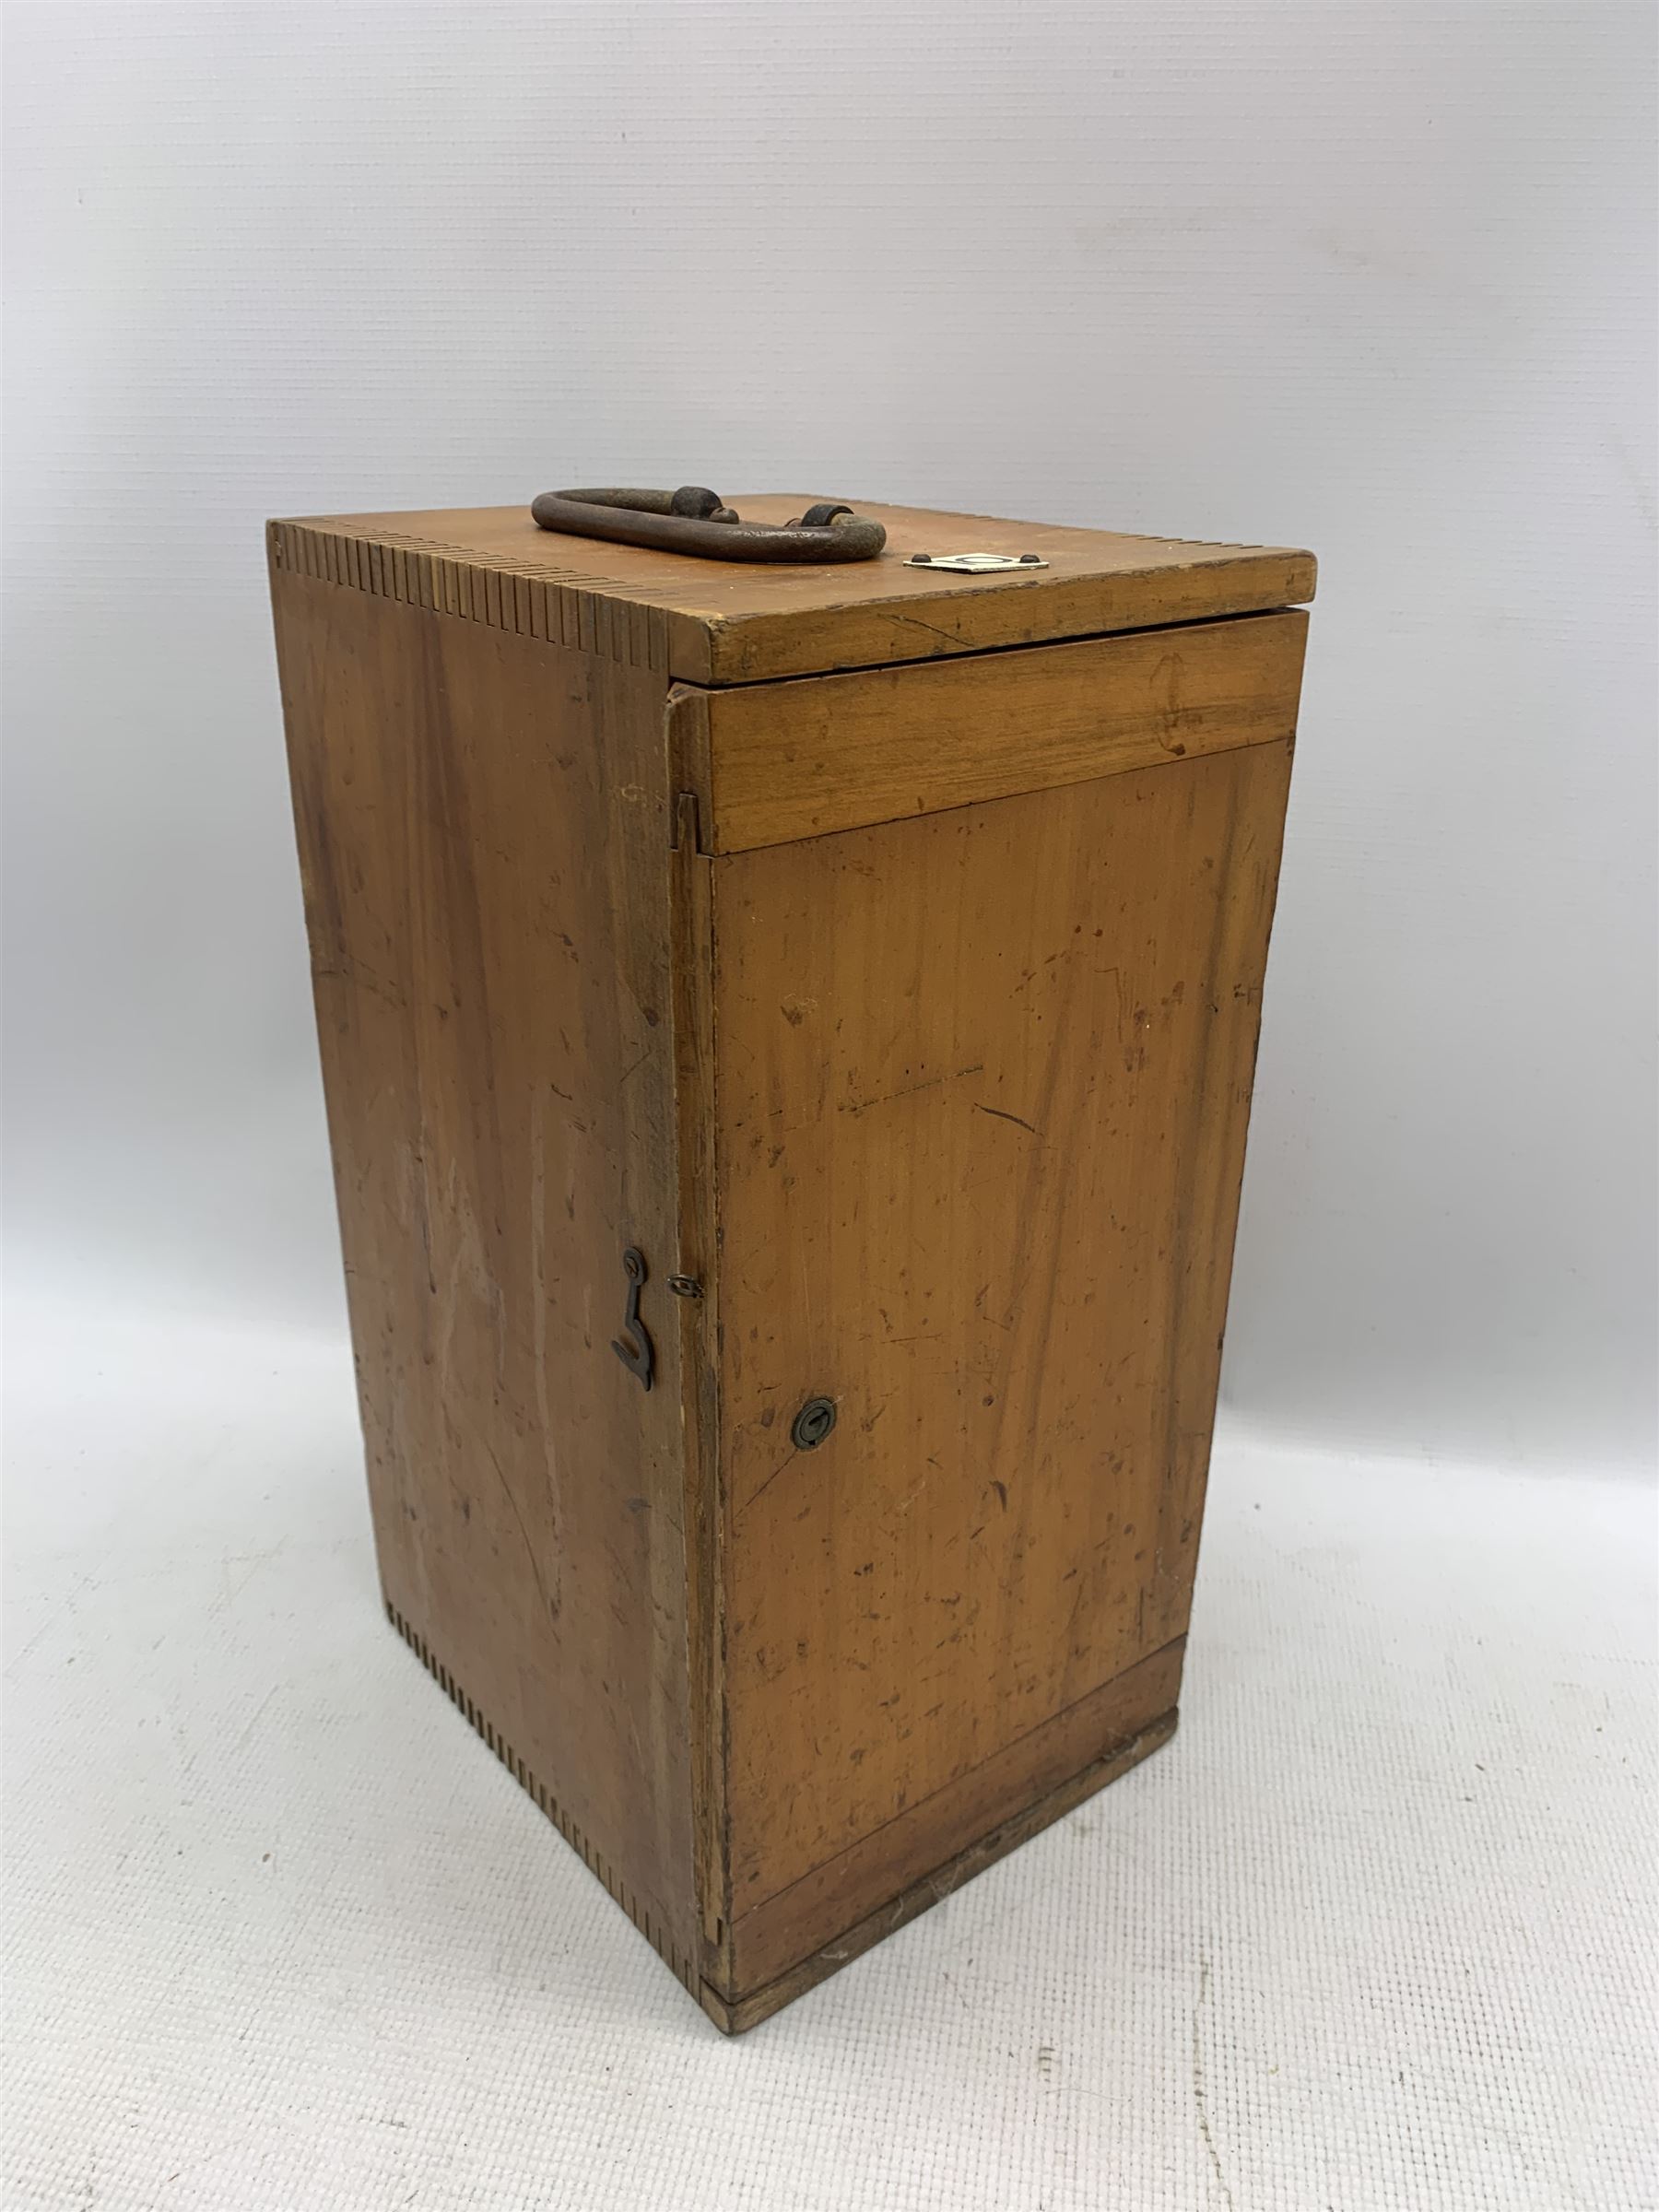 Bausch and Lomb microscope in black lacquer finish No.239645 in wooden case - Image 2 of 2